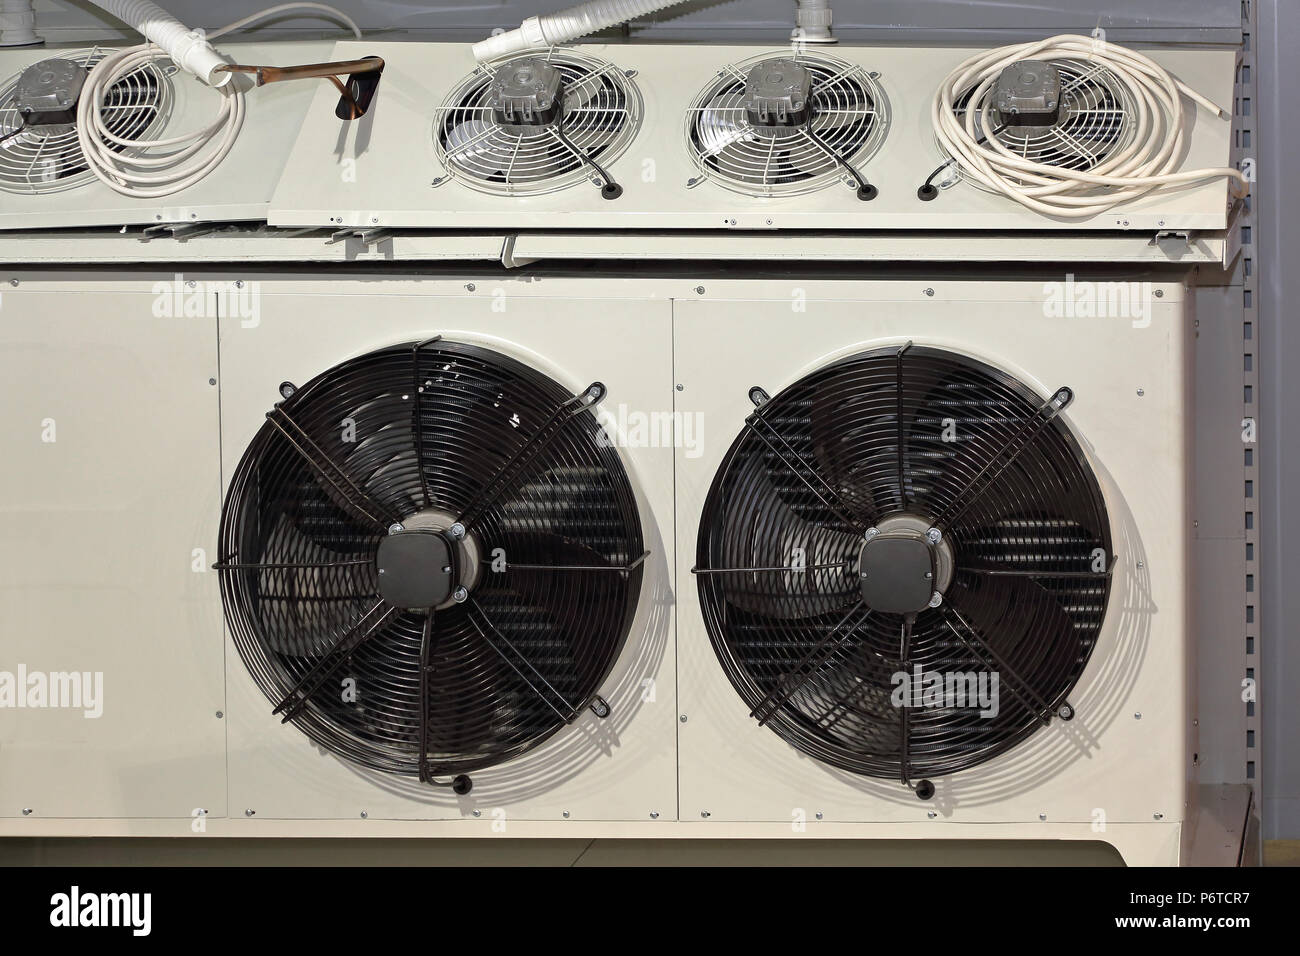 Industrial fans and blowers for big air conditioner unit Stock Photo